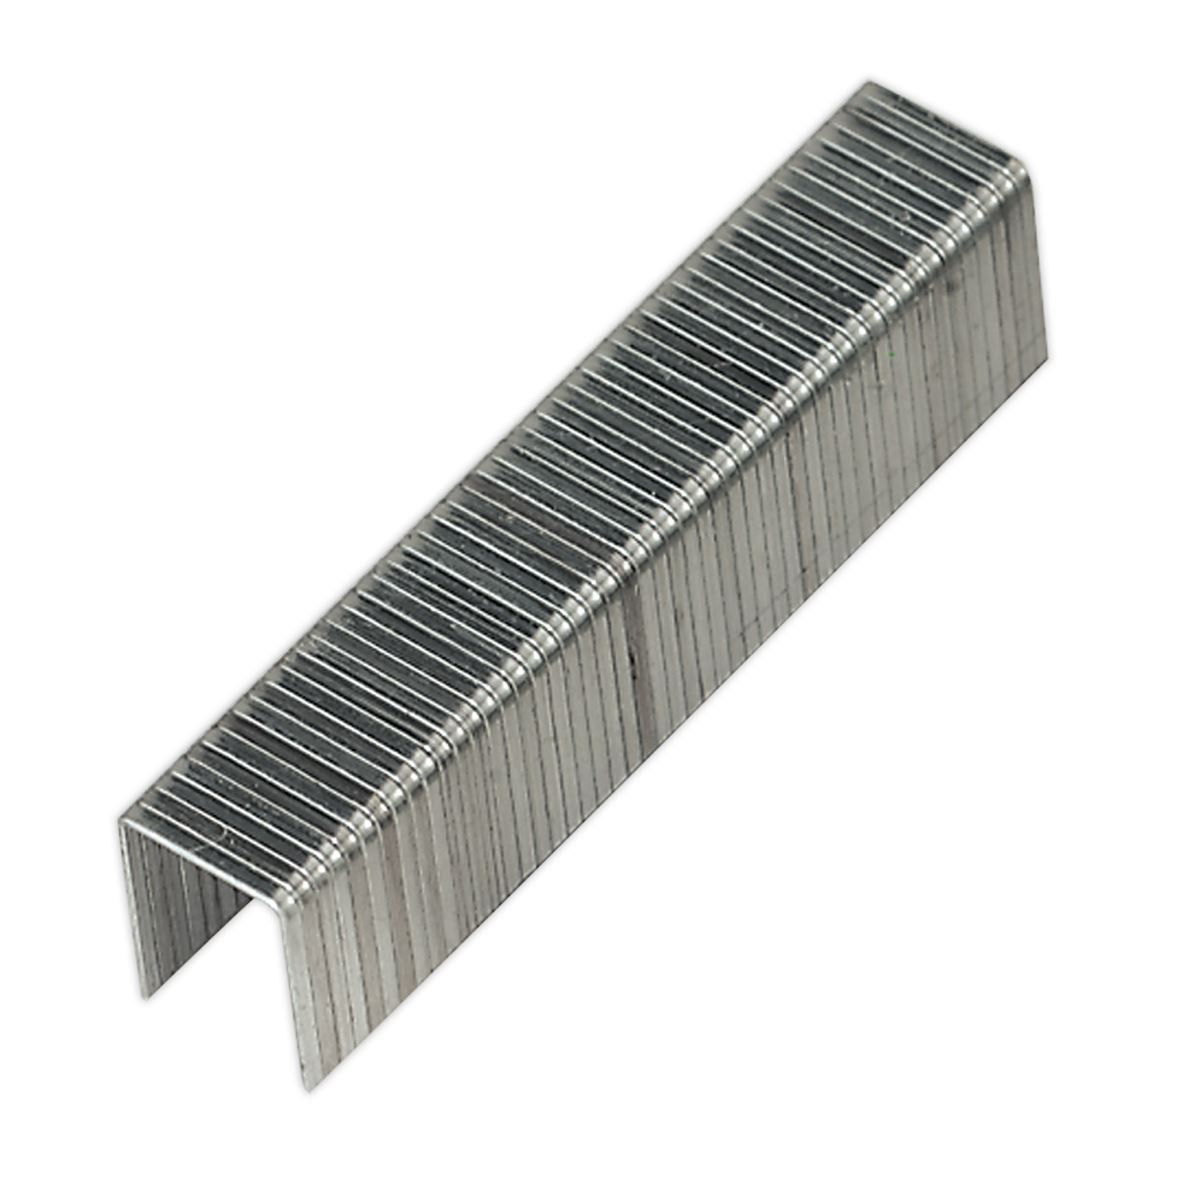 Sealey Staples 10mm Pack of 500